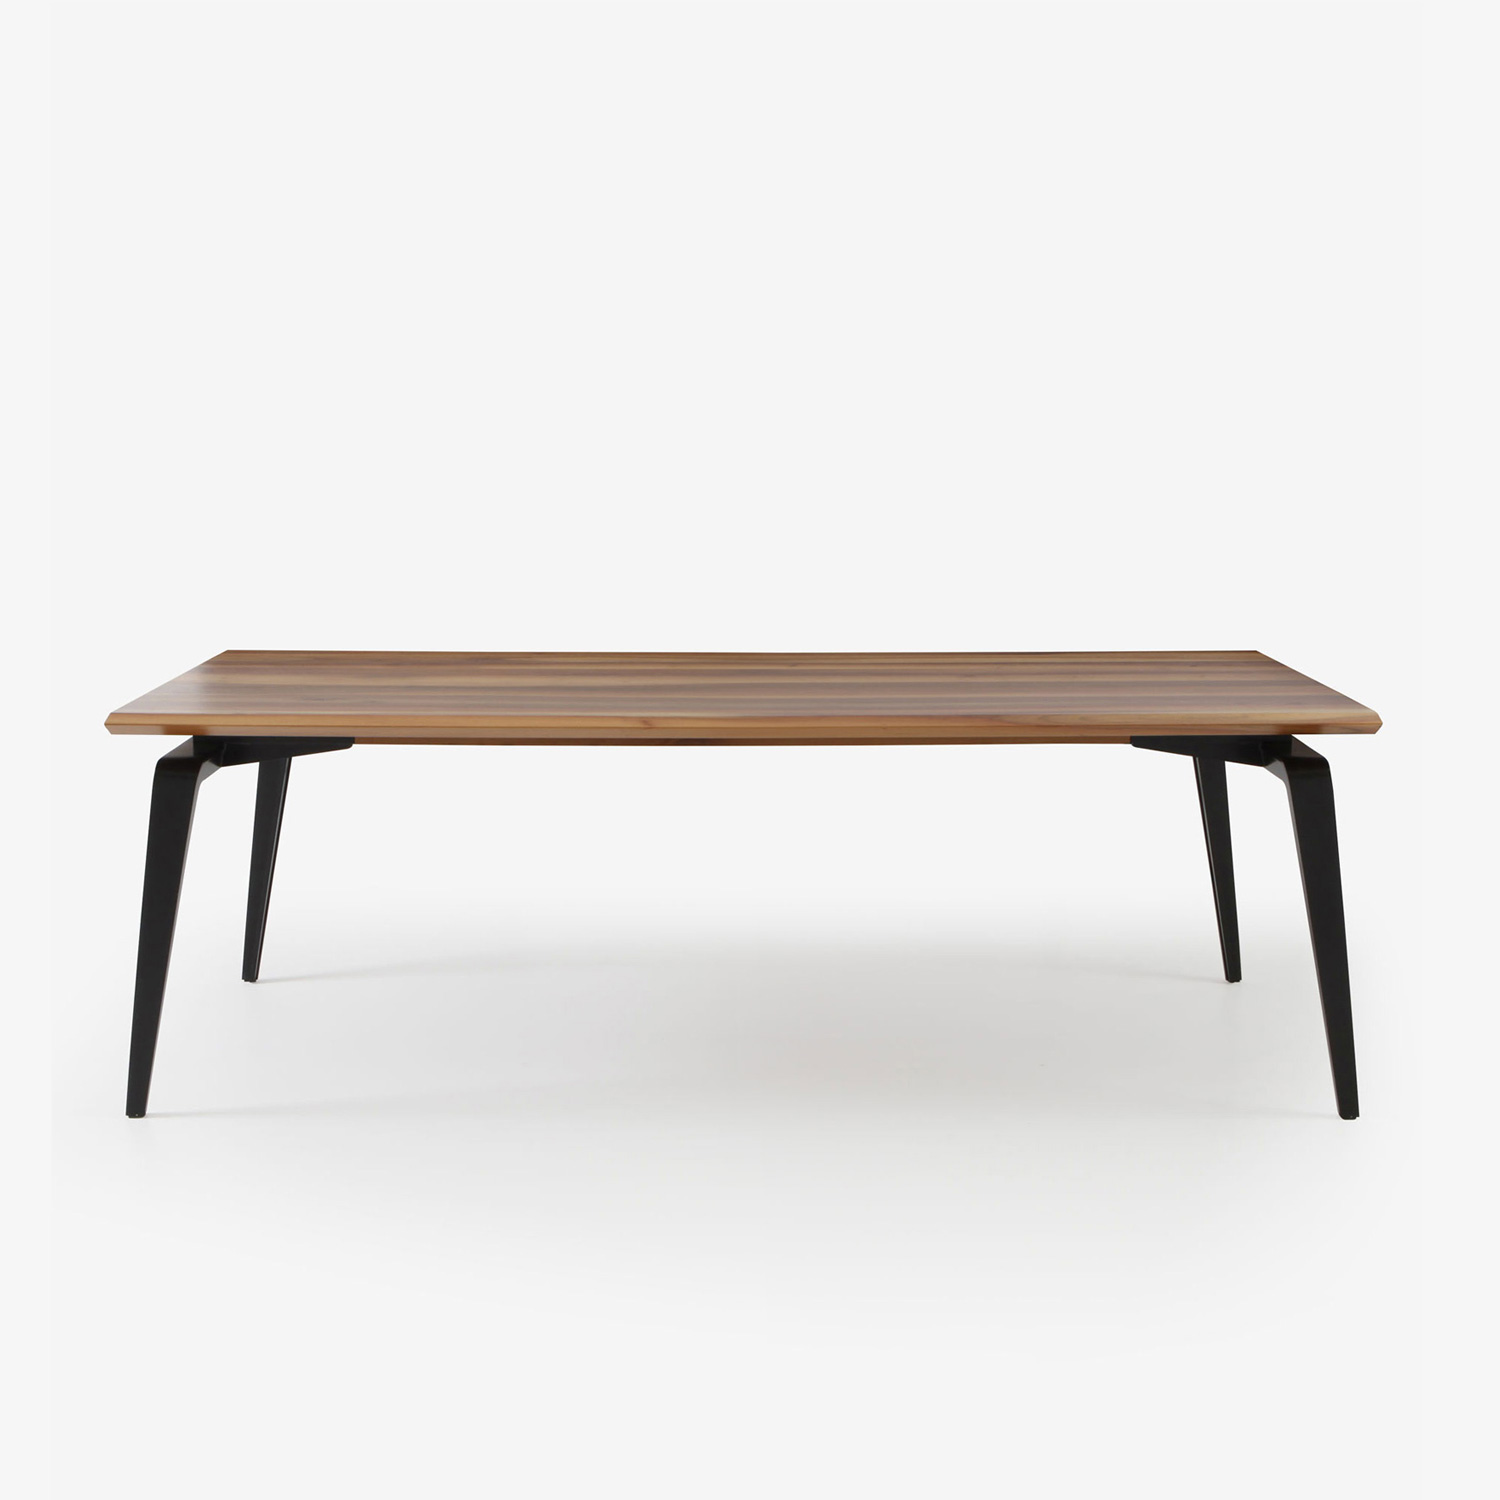 Image RECTANGULAR DINING TABLE BLACK LACQUERED BASE 